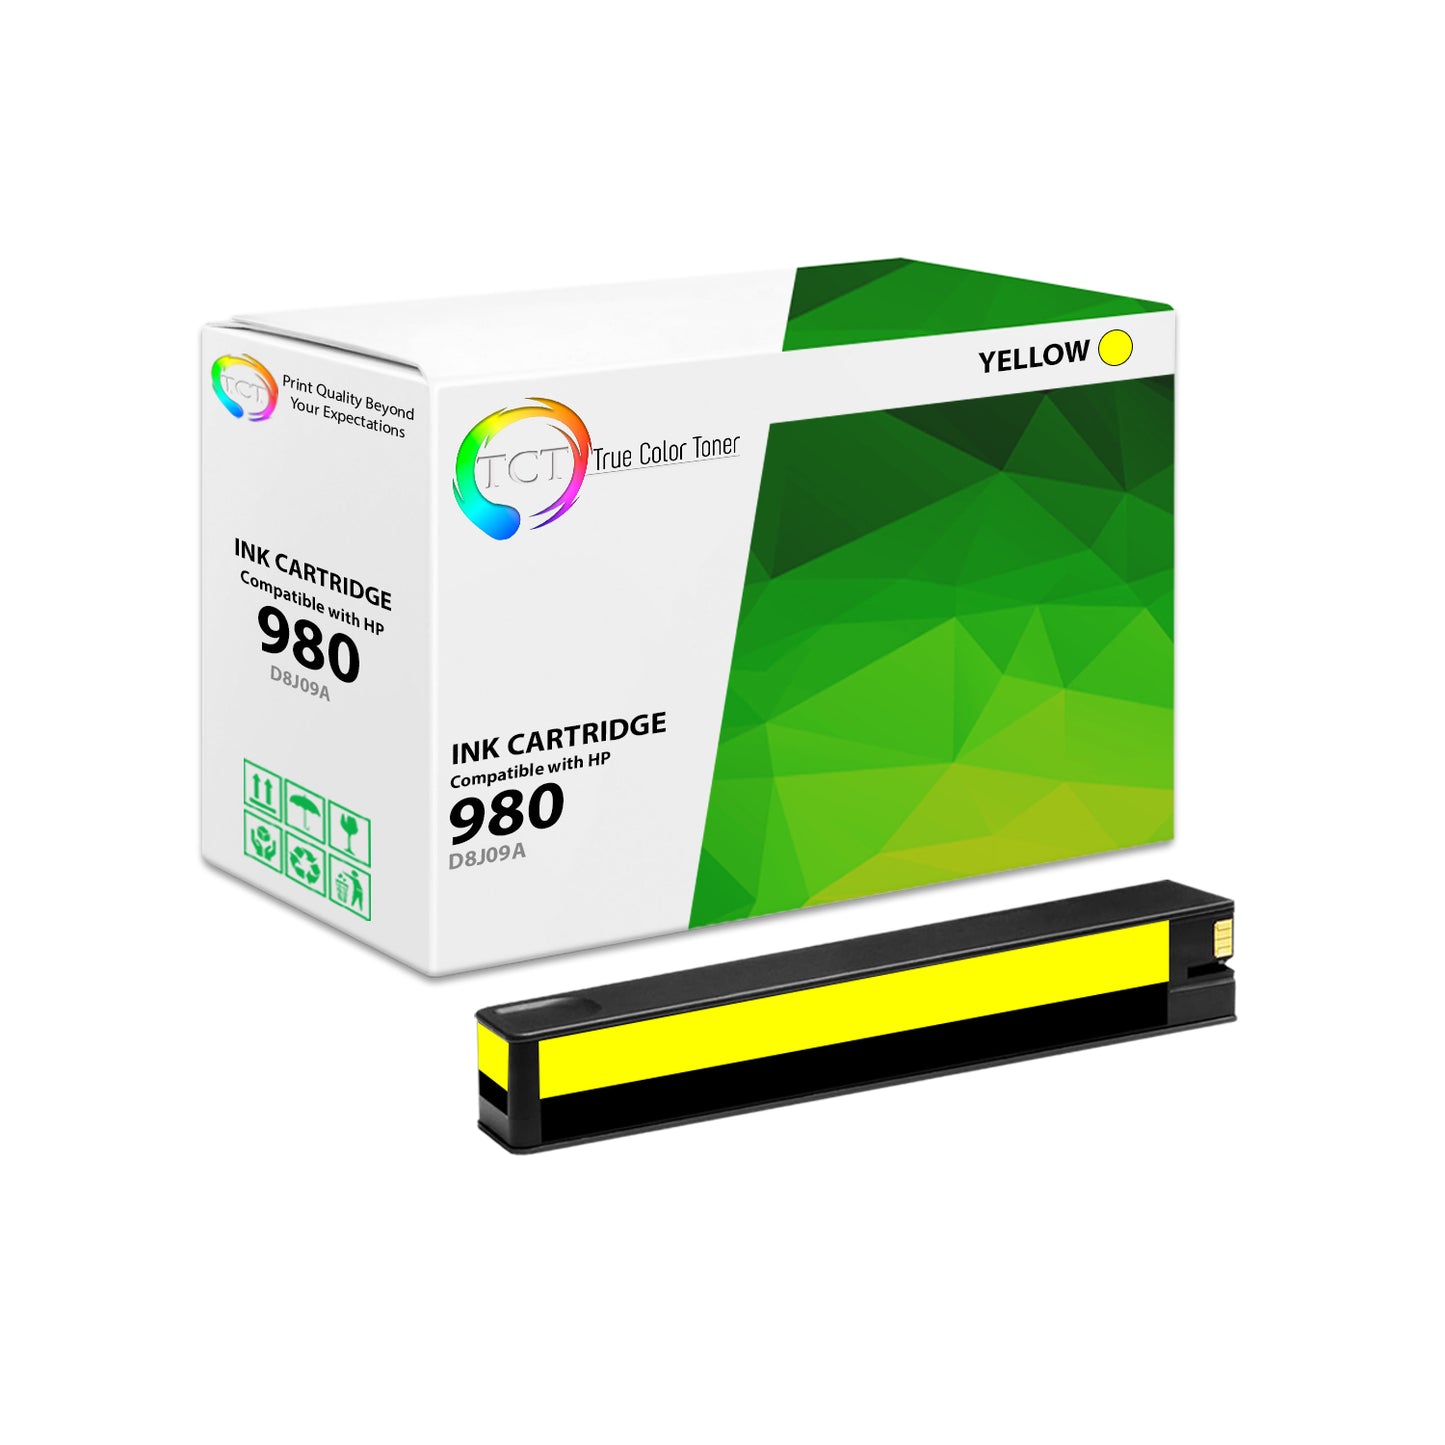 TCT Compatible Ink Cartridge Replacement for the HP 980 Series - 1 Pack Yellow